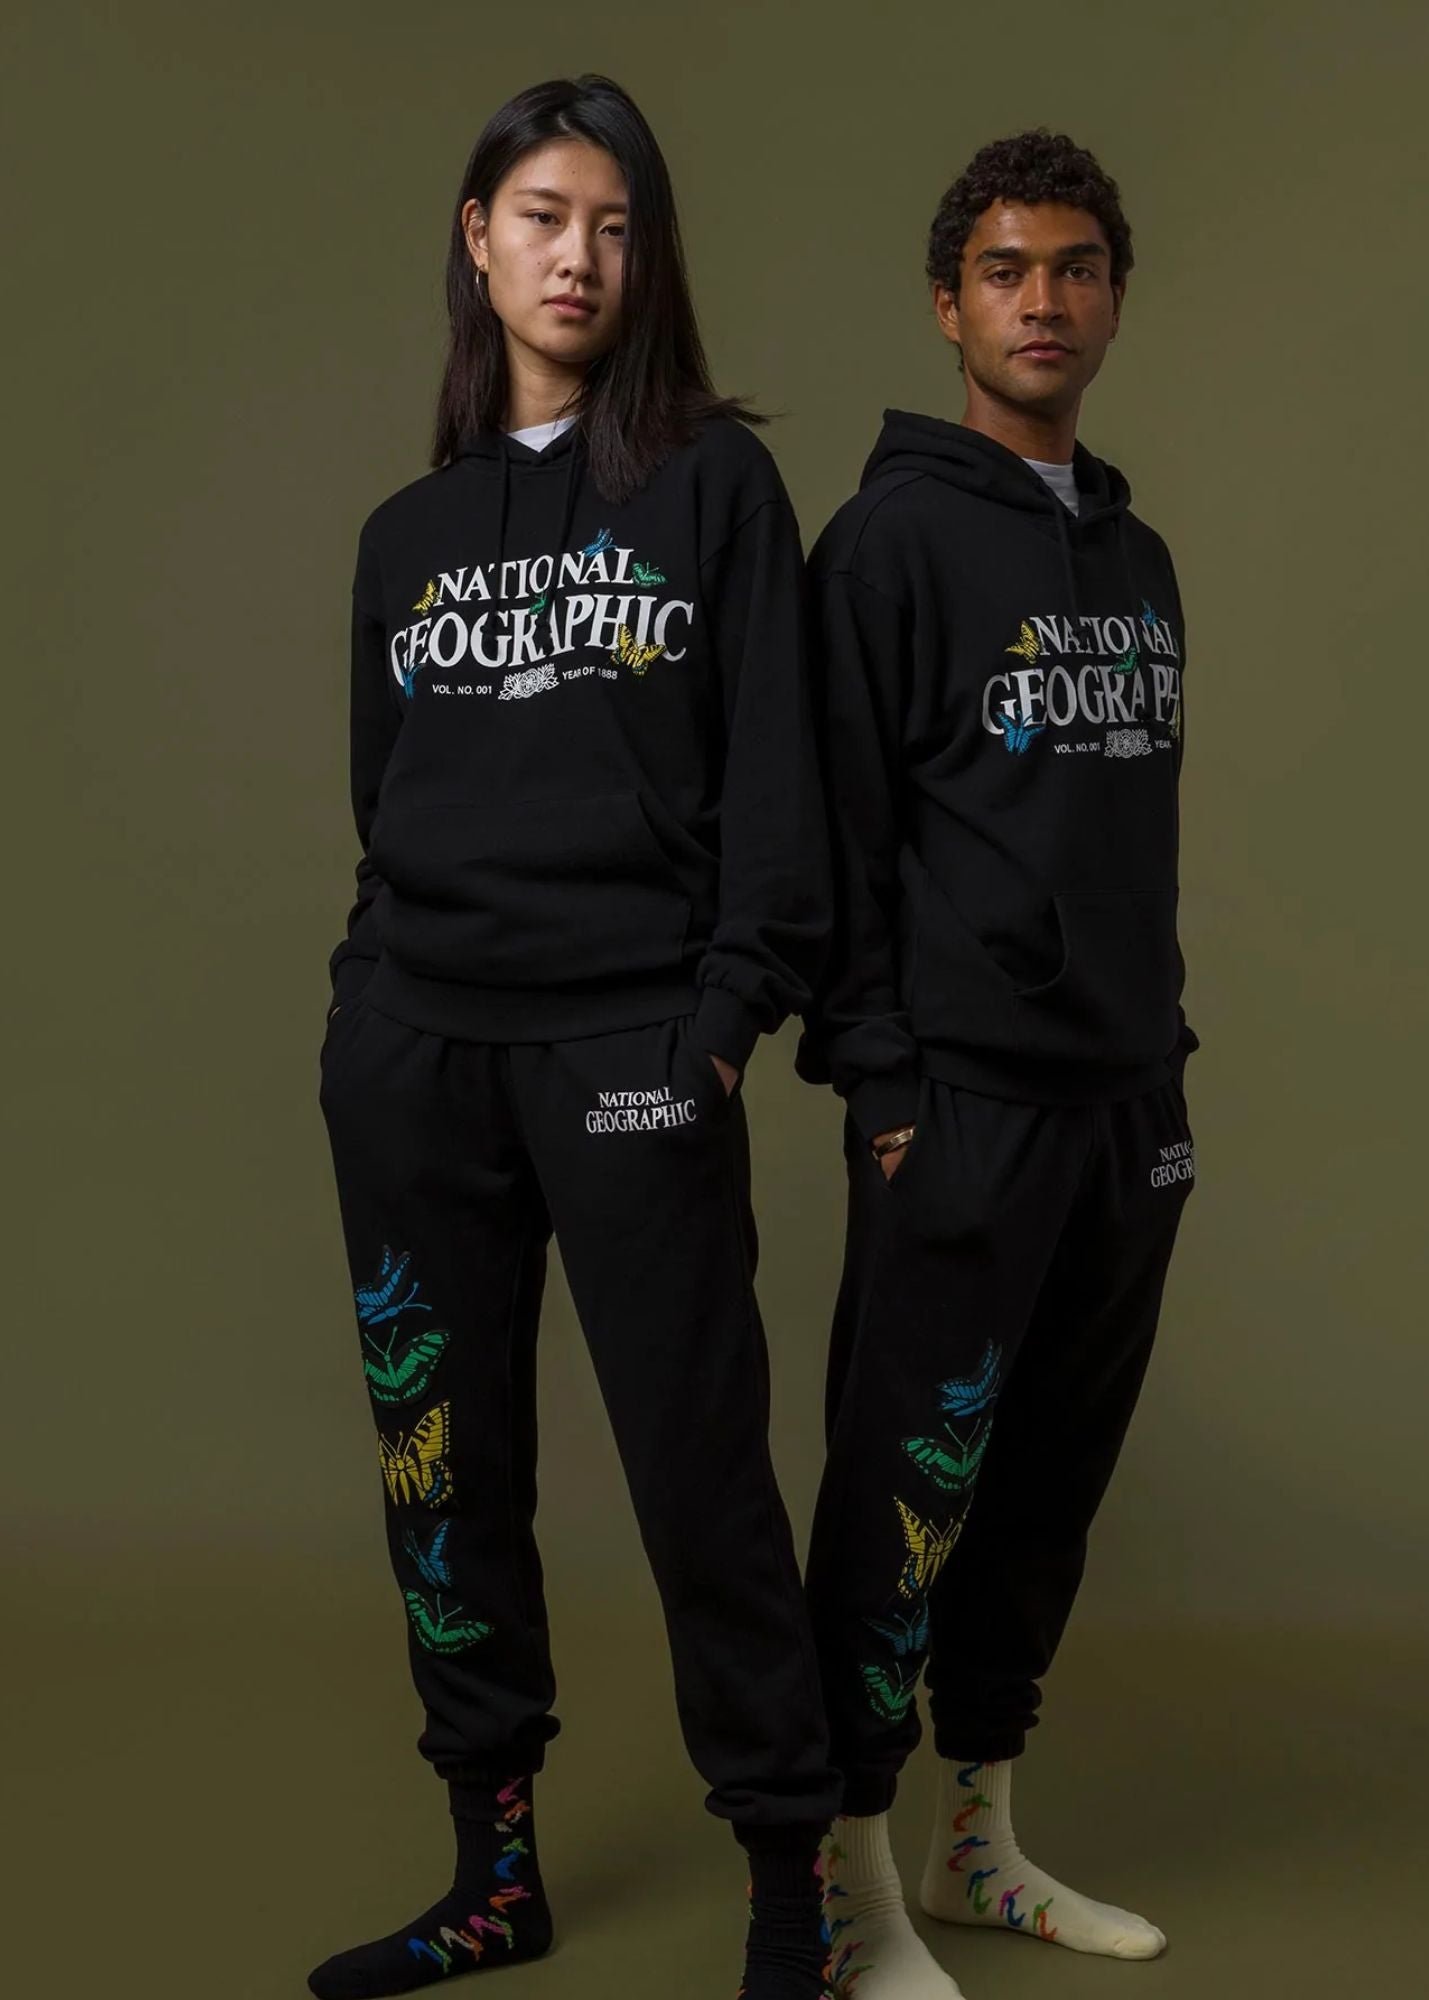 Lounge Pants National Geographic x Parks Project Night Butterflies Organic Jogger Parks Project